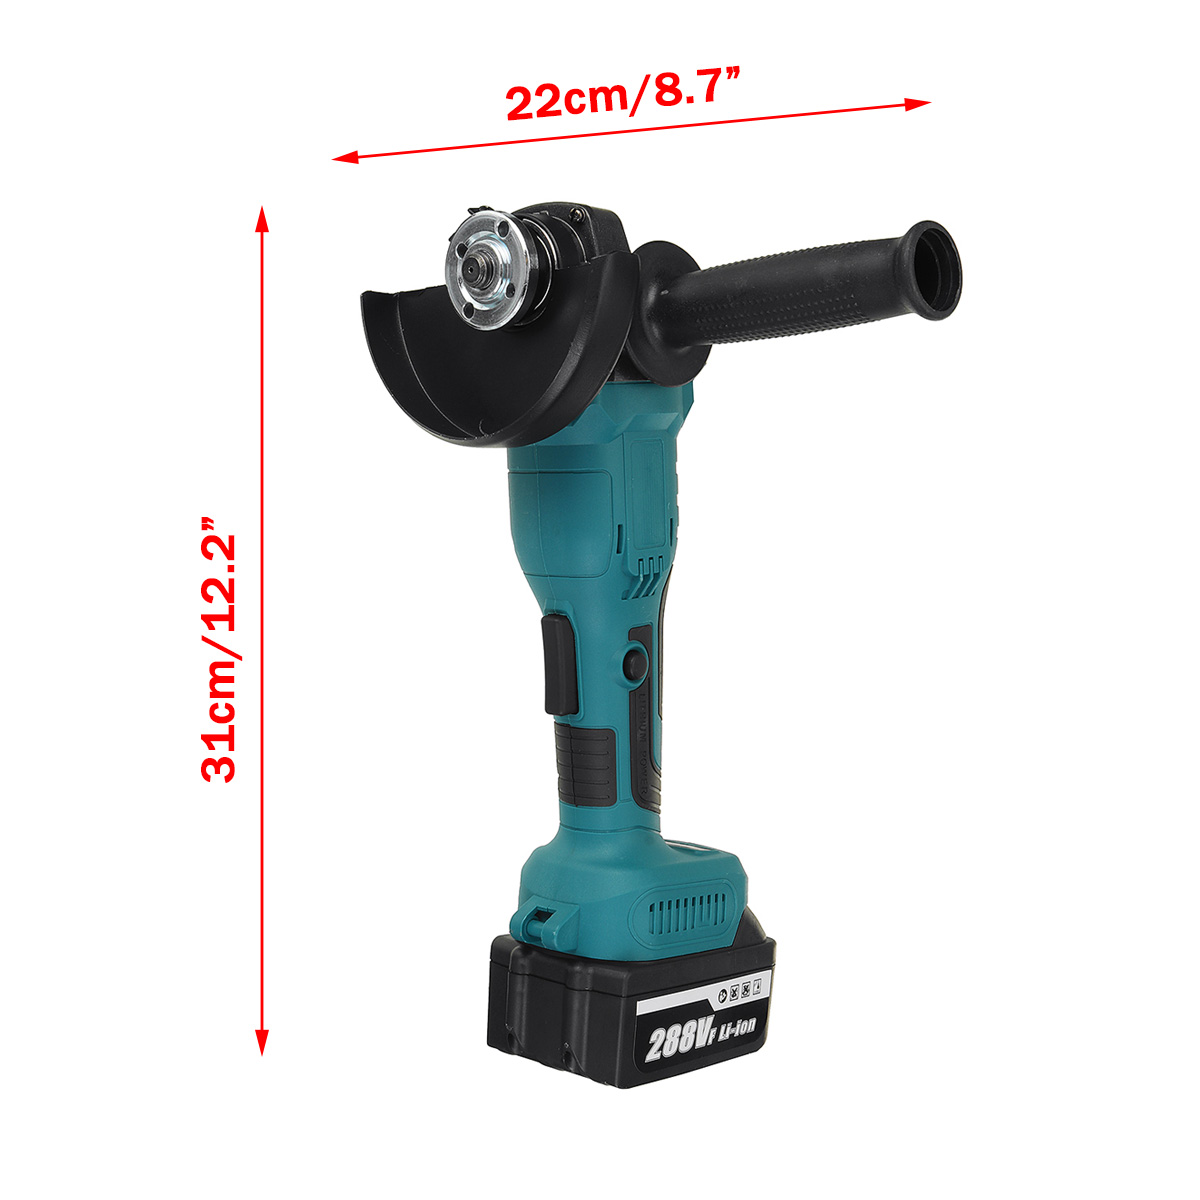 100125mm-Brushless-Cordless-Angle-Grinder-Polisher-Cutting-Tool-W-None12-Battery-For-Makita-1867833-6